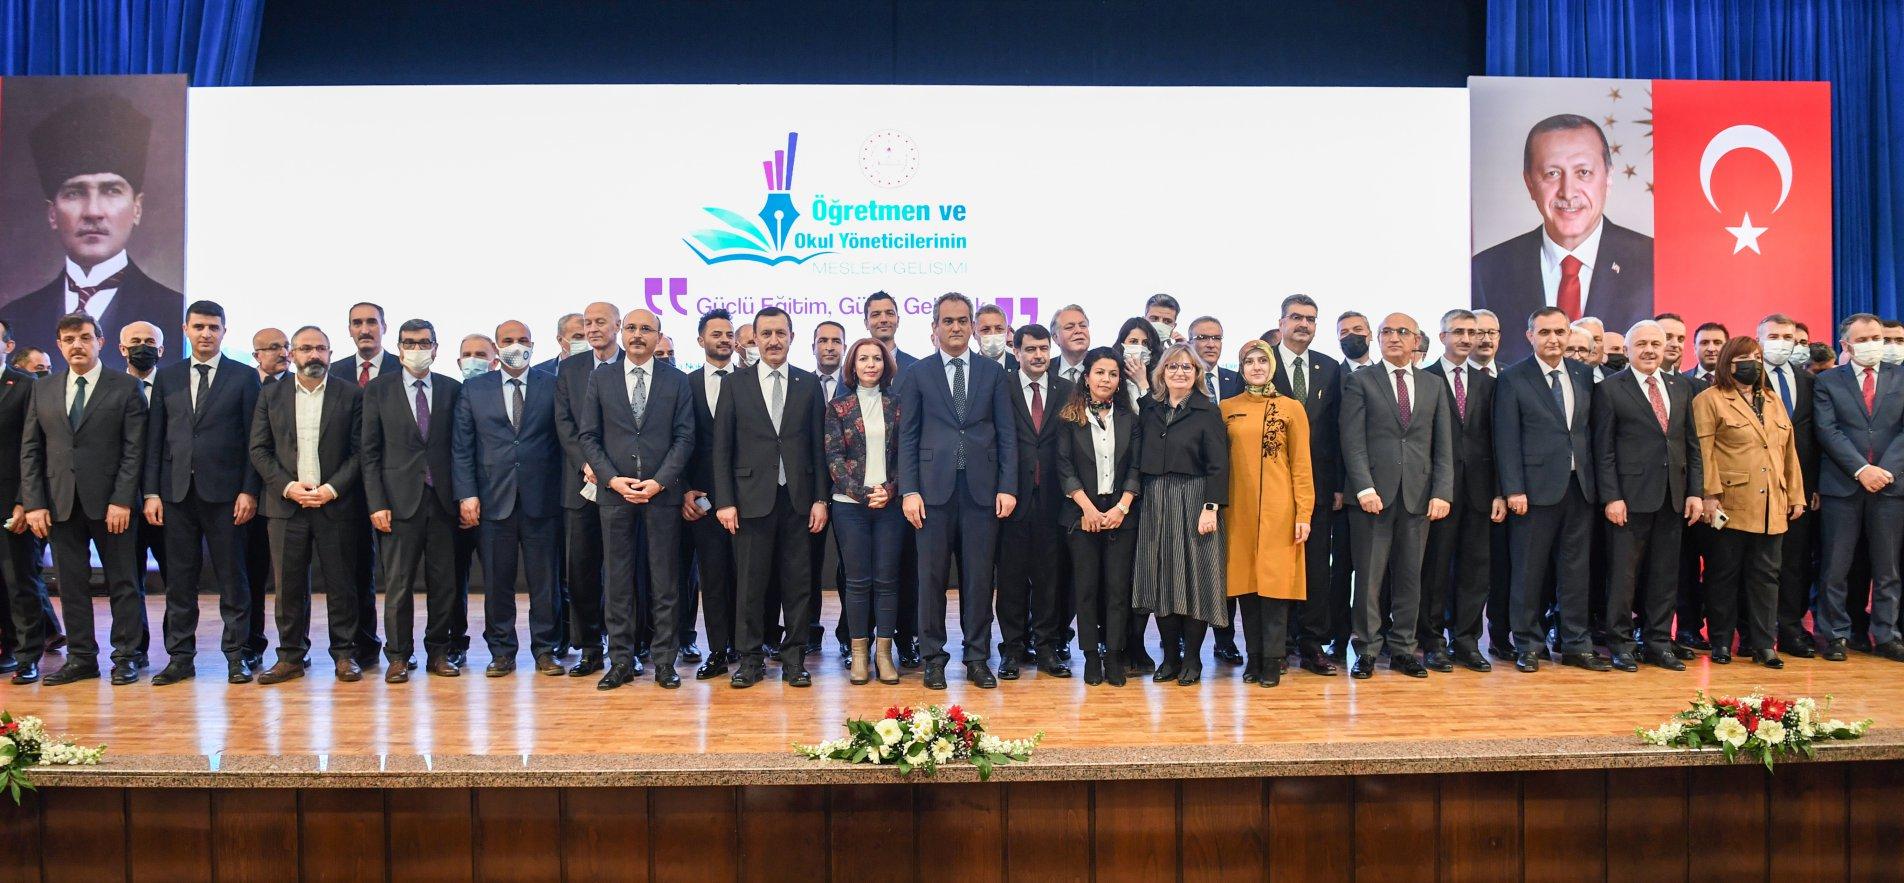 MINISTER ÖZER: A SOCIETY IS AS STRONG AS ITS TEACHERS